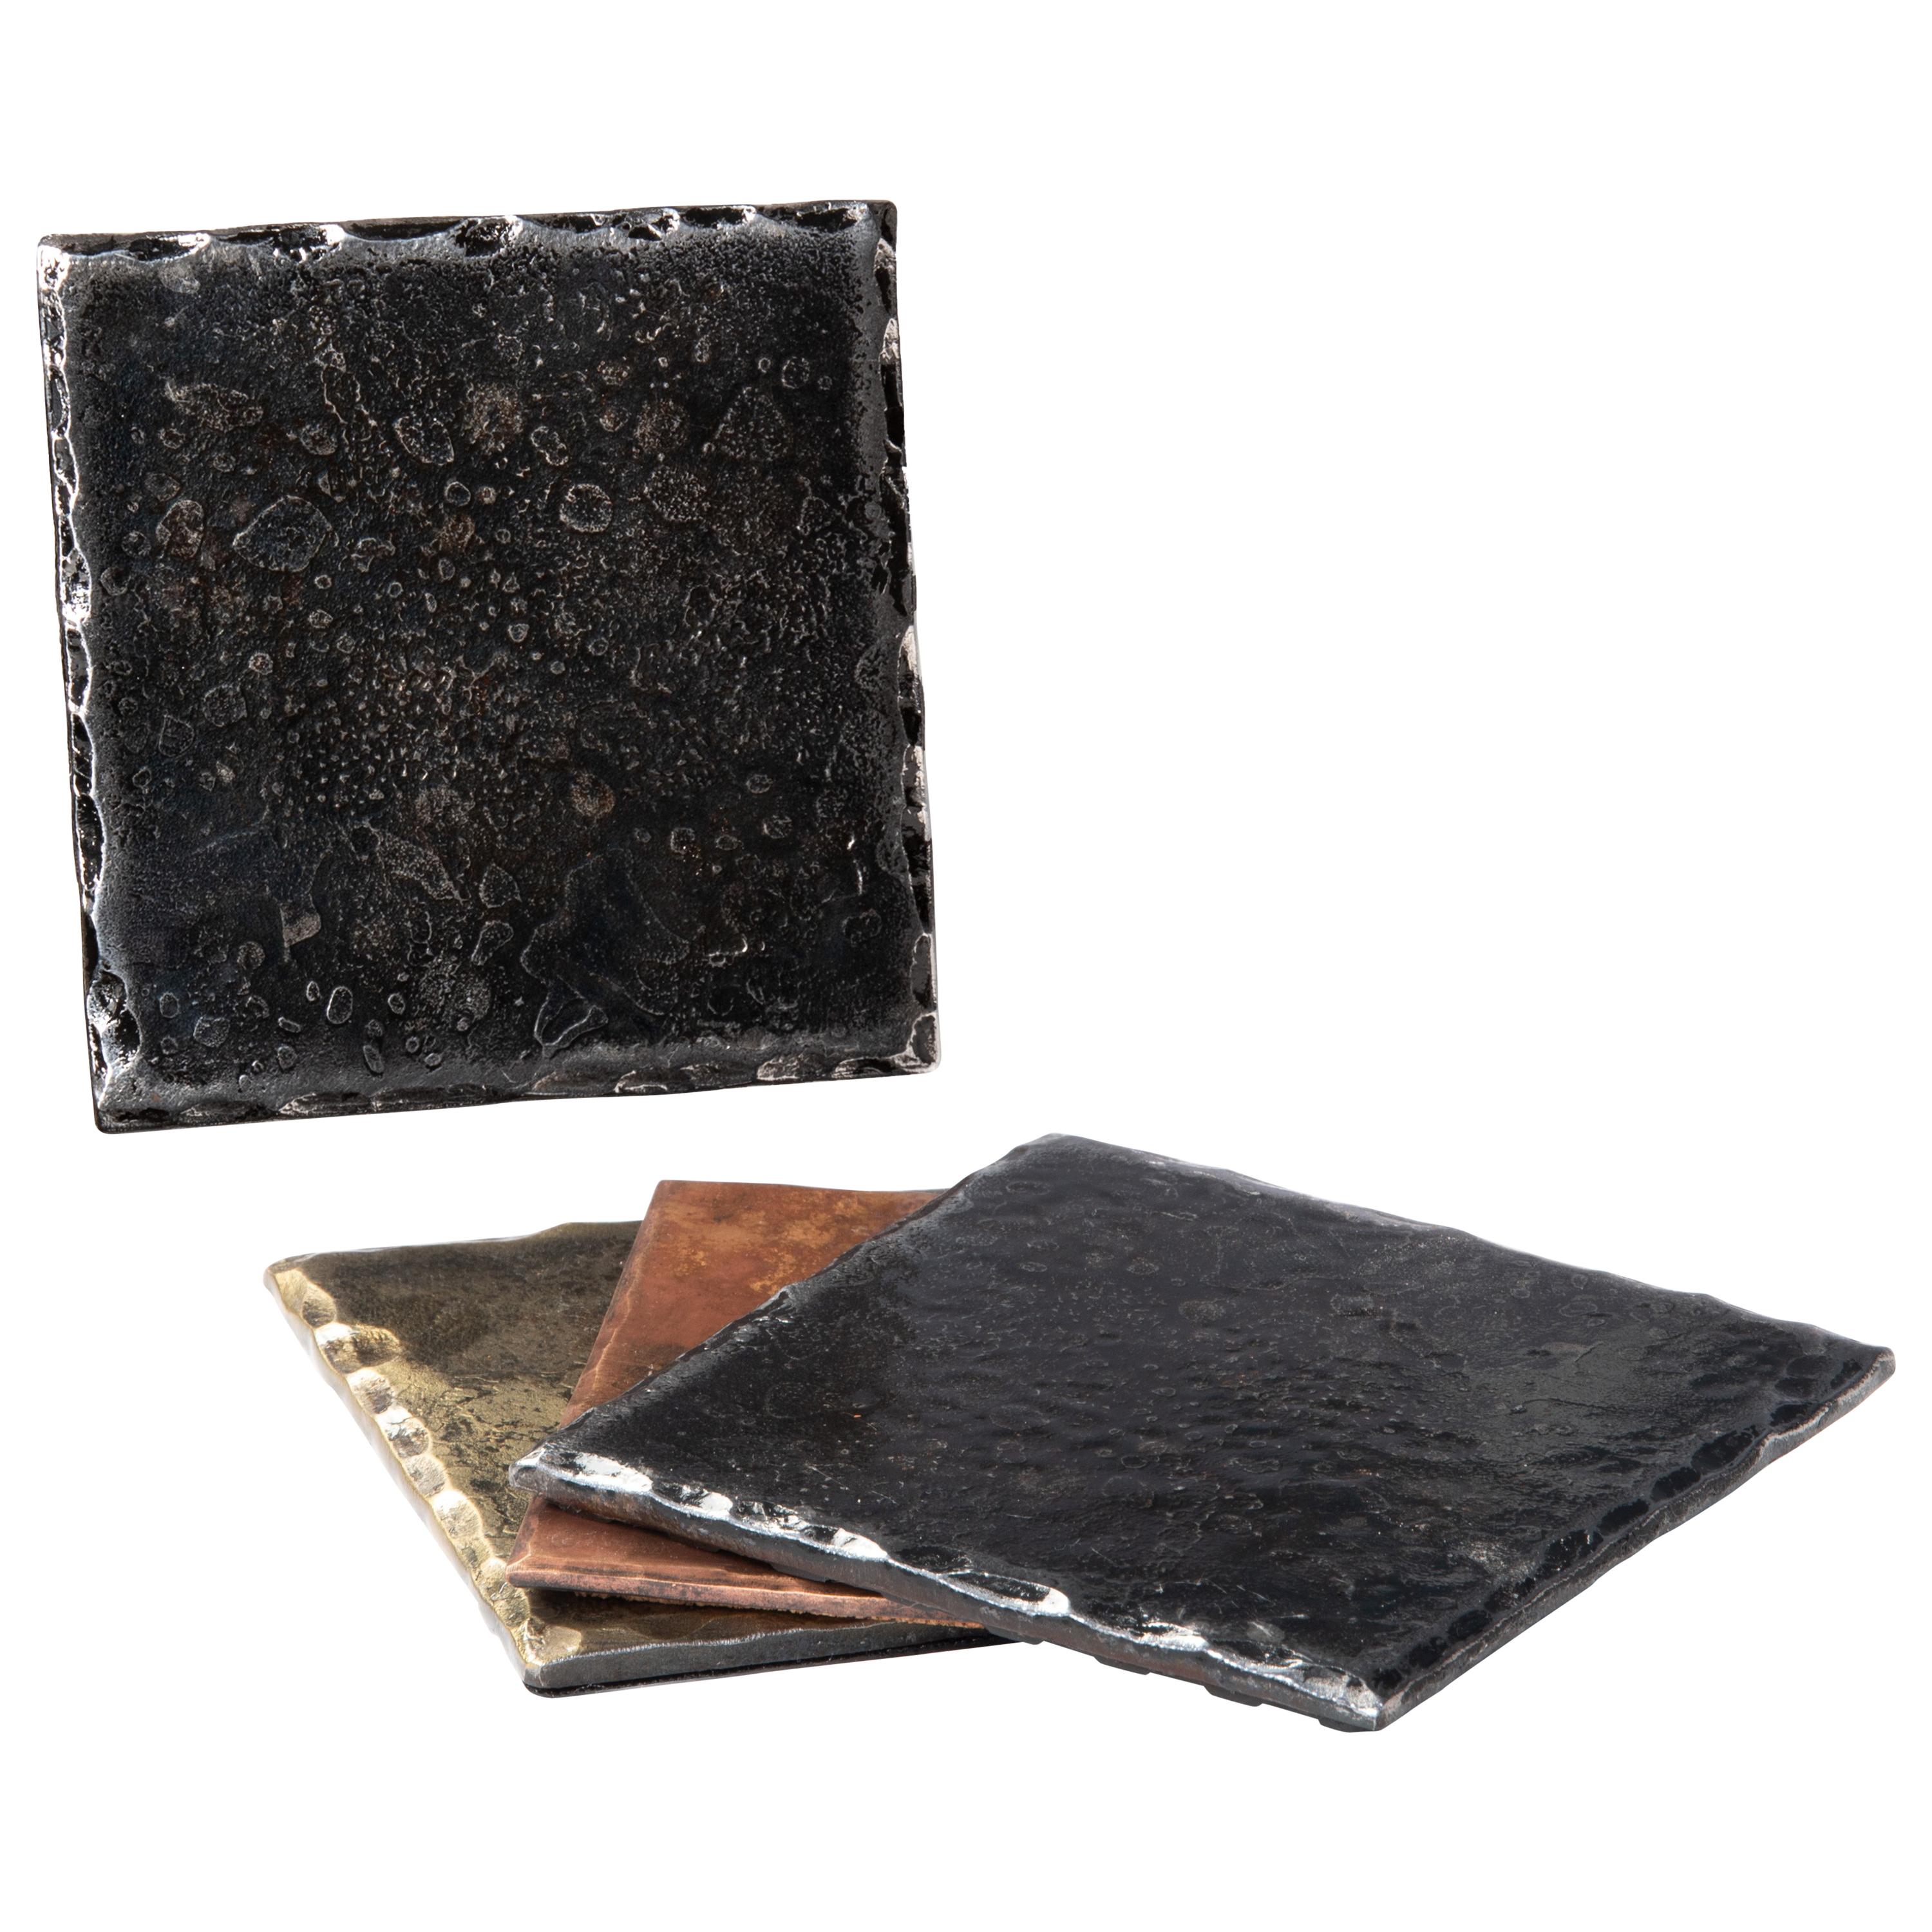 A handcrafted, forged, steel square coaster with hammered, bevelled edges that have been carefully polished. Wire brushed and lightly sanded to accentuate the contrast between the edges and the surface. A glossy clear coat enhances the richness of